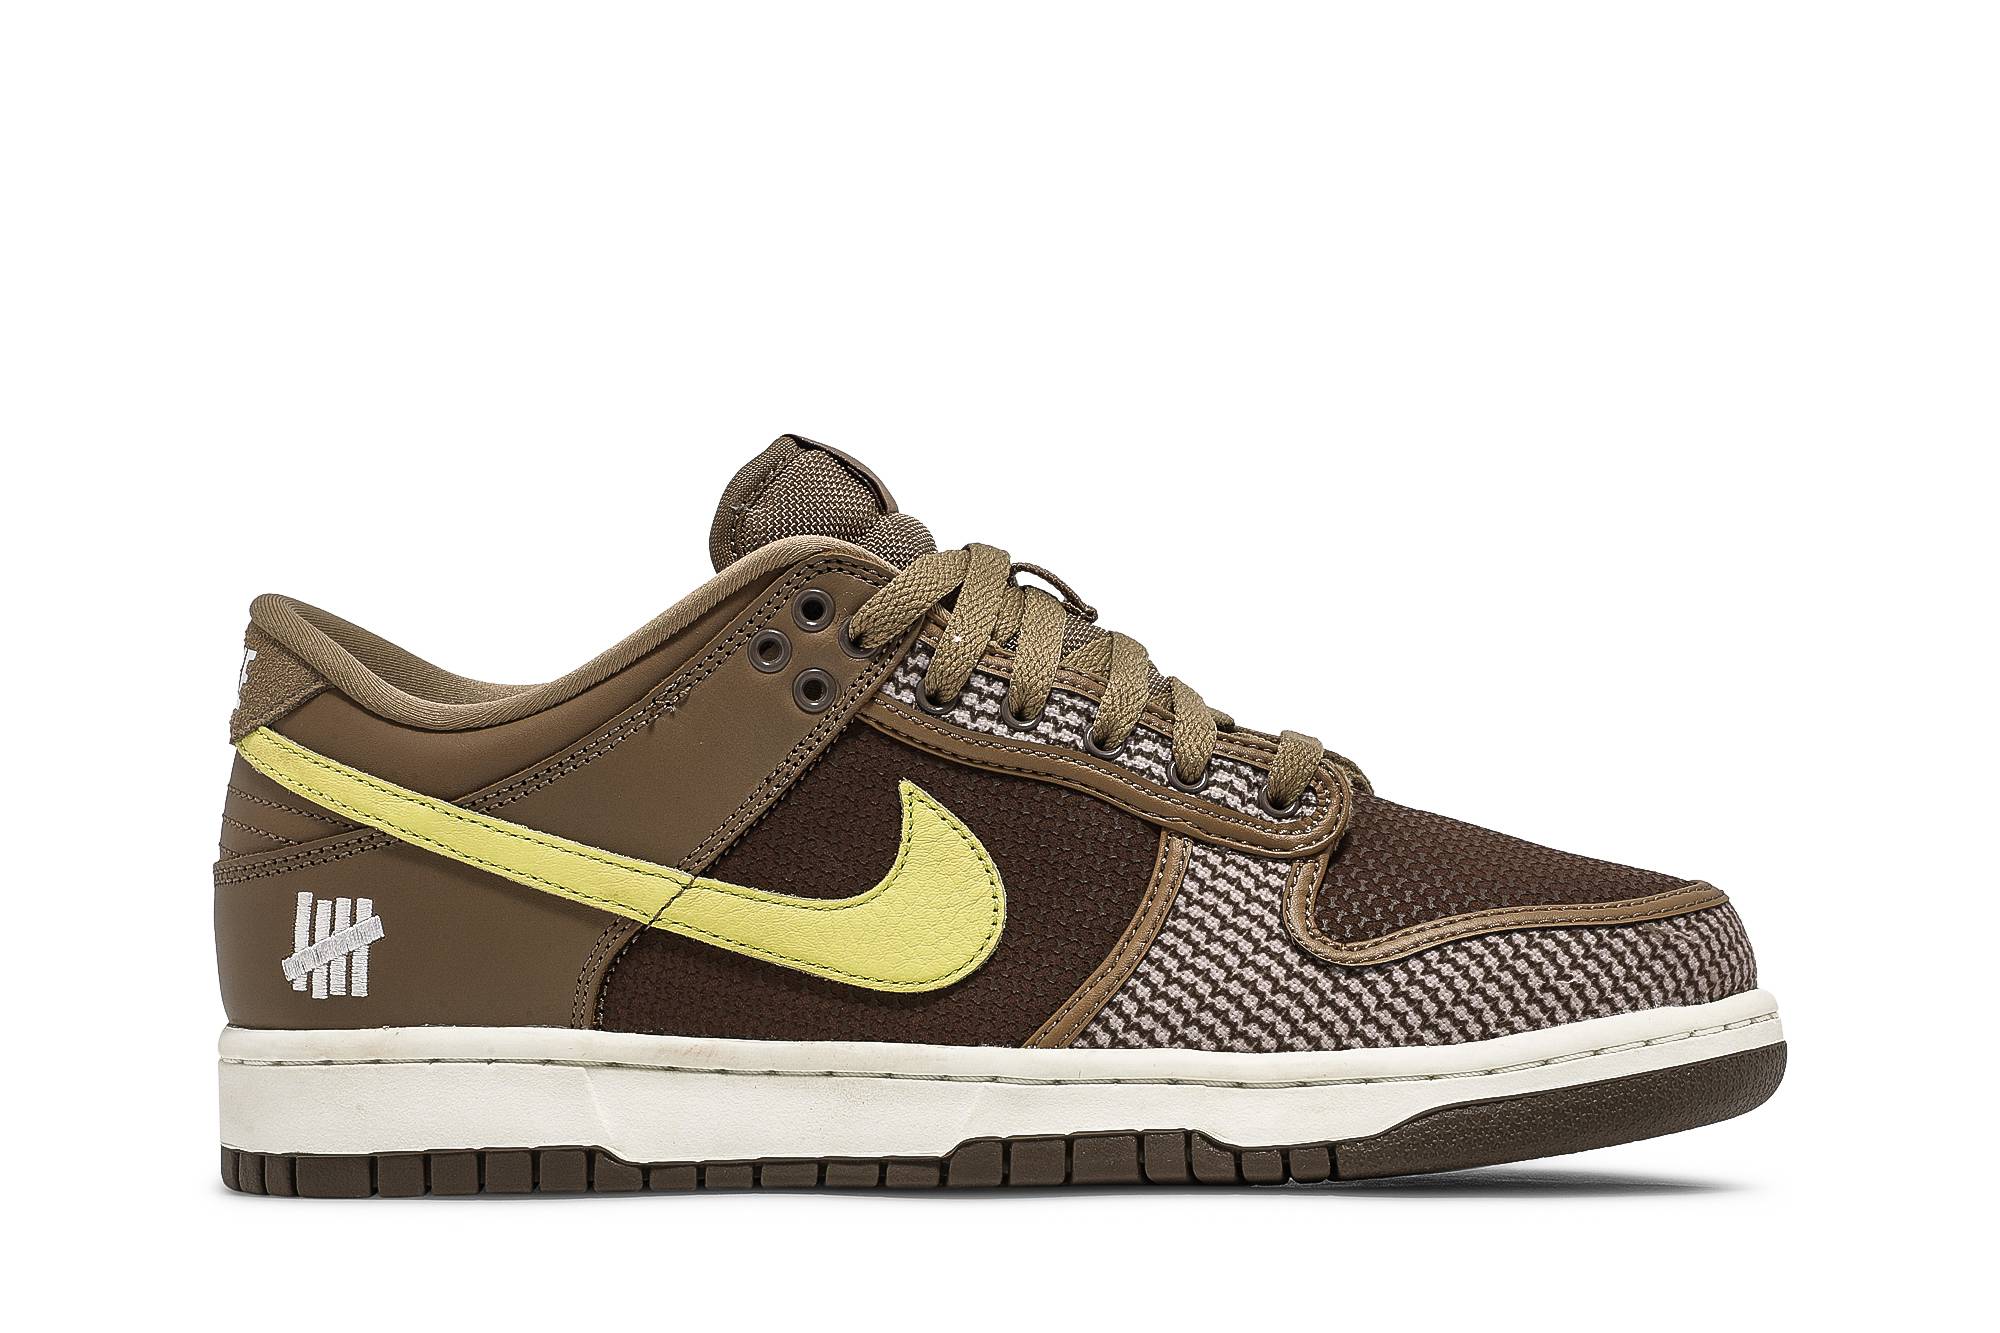 UNDEFEATED x Nike Dunk Low SP 'Canteen' DH3061-200